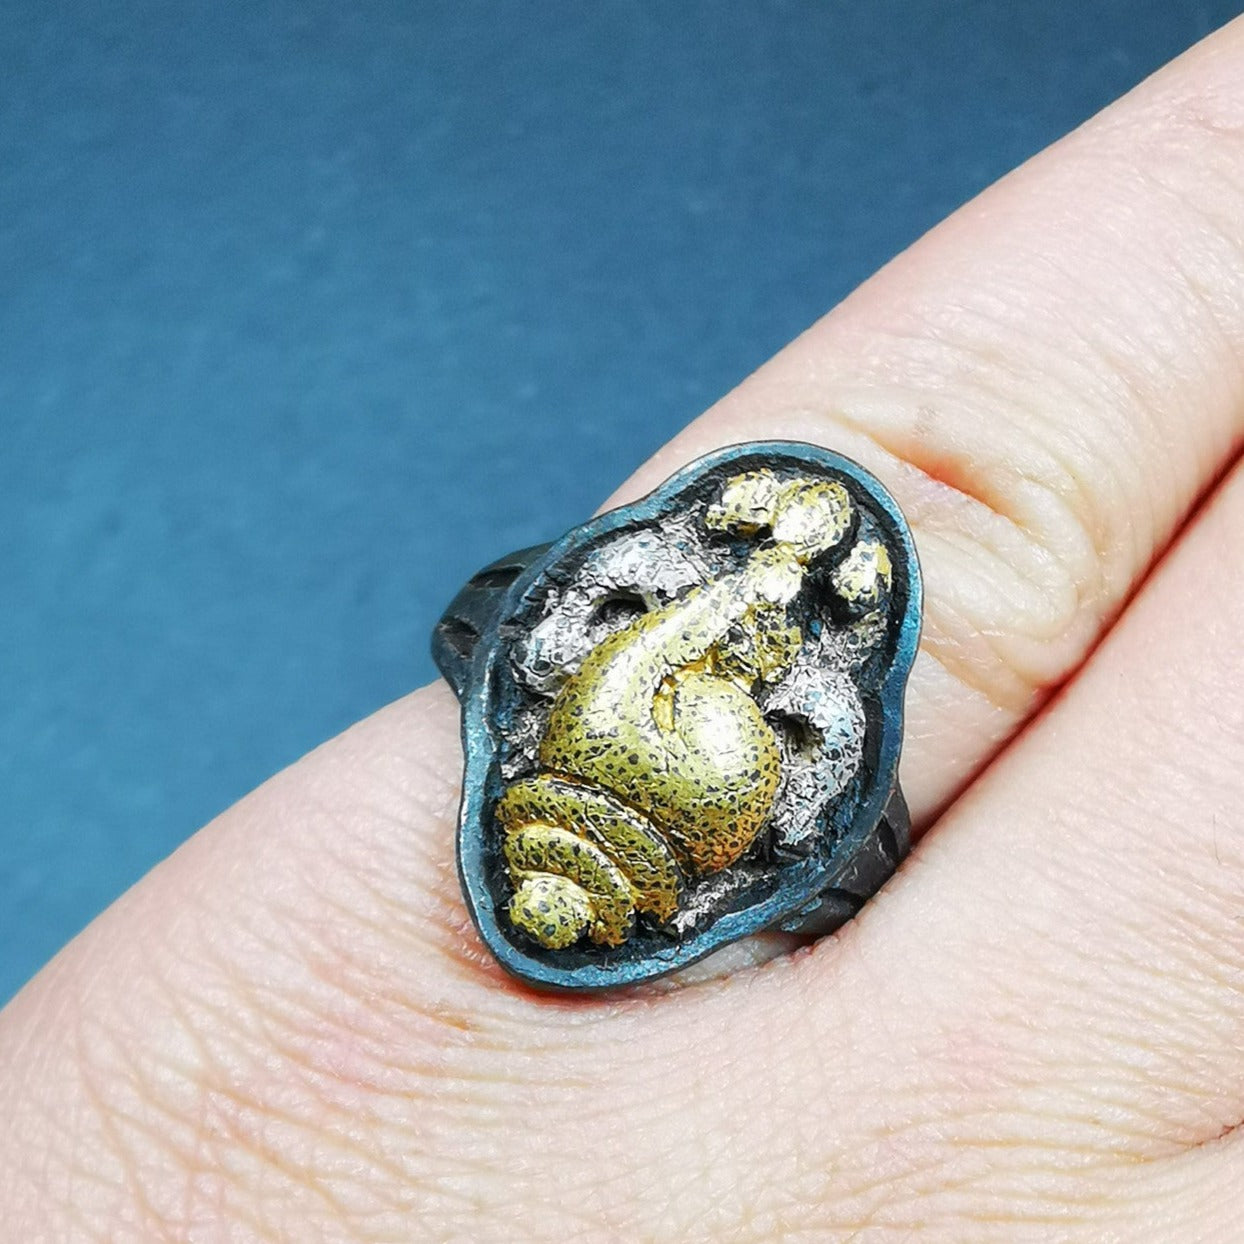 Gandhanra Unique Handcrafted Tibetan Buddhist Conch Ring,Made of Pure Gold Filled and Silver Filled,Protection Jewelry,0.87"